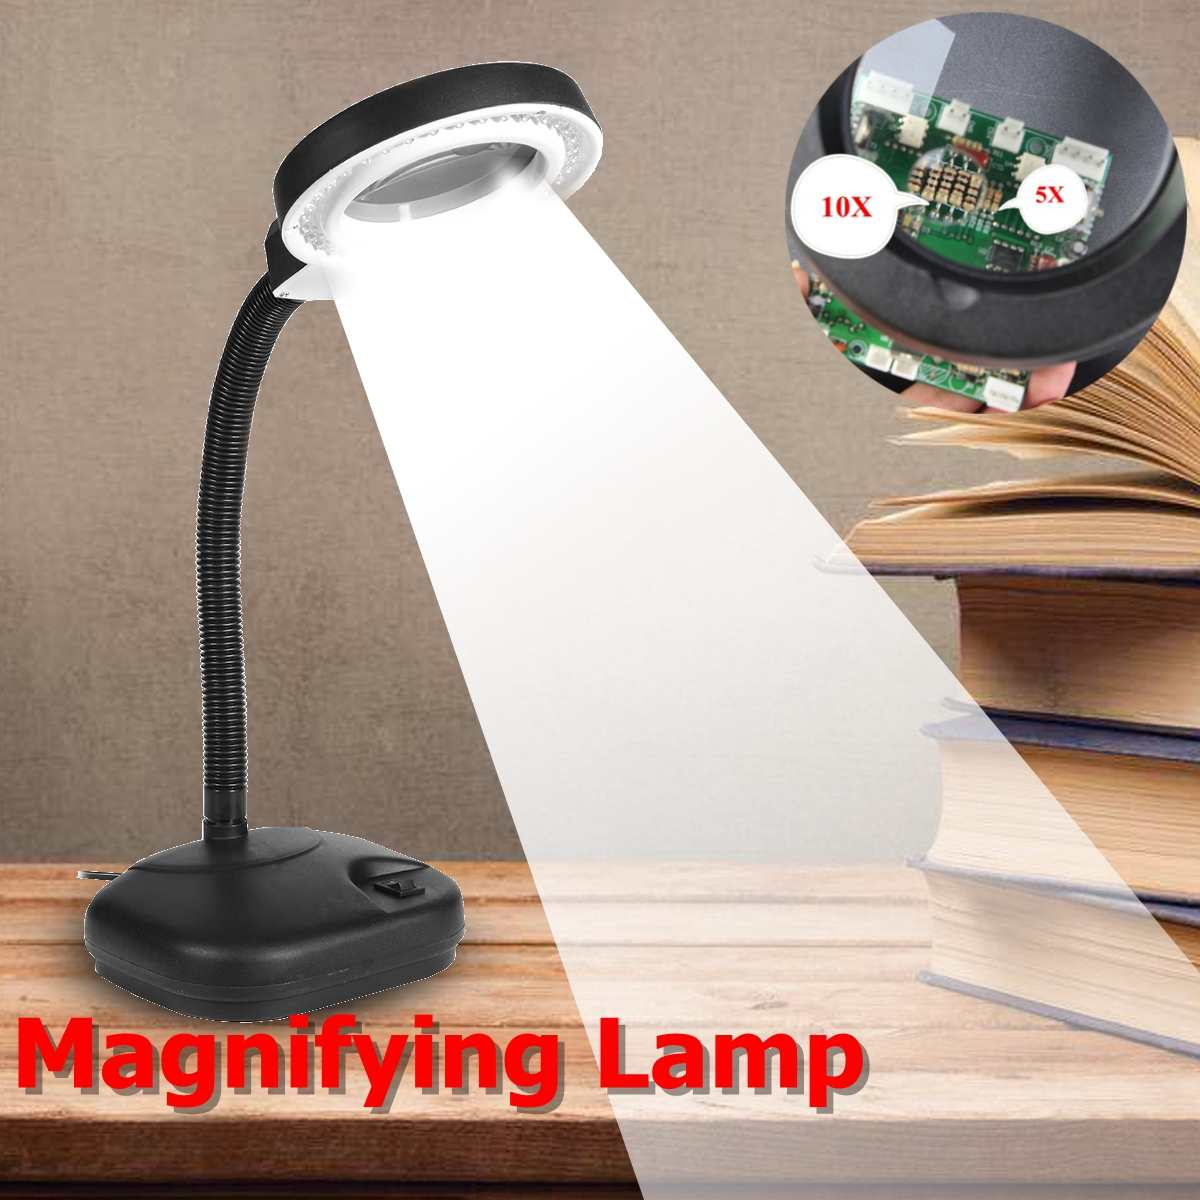 Us 1789 47 Off40 Led Desktop Magnifying Lamp 5x 10x Magnifier Light Daylight Craft Glass Table In Led Table Lamps From Lights Lighting On intended for sizing 1200 X 1200